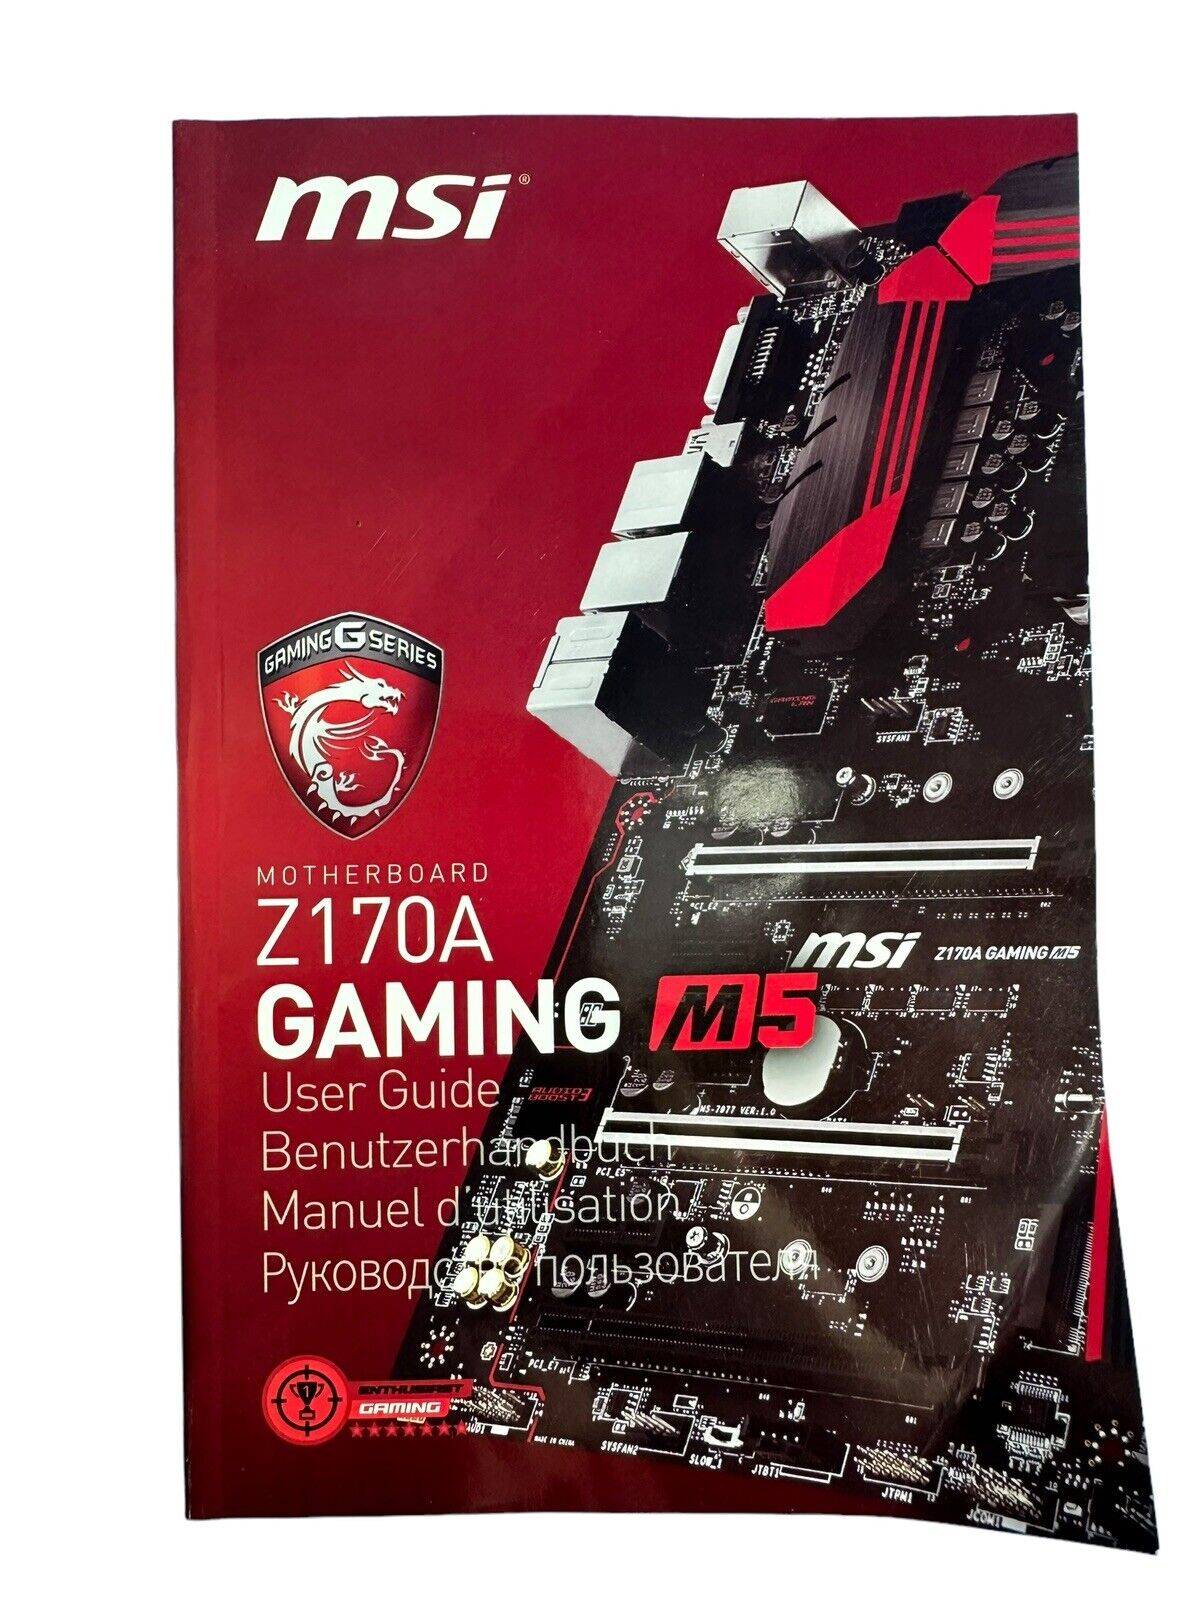 msi Gaming Series User Guide Book Only Motherboard Z170A Gaming M5 Manual